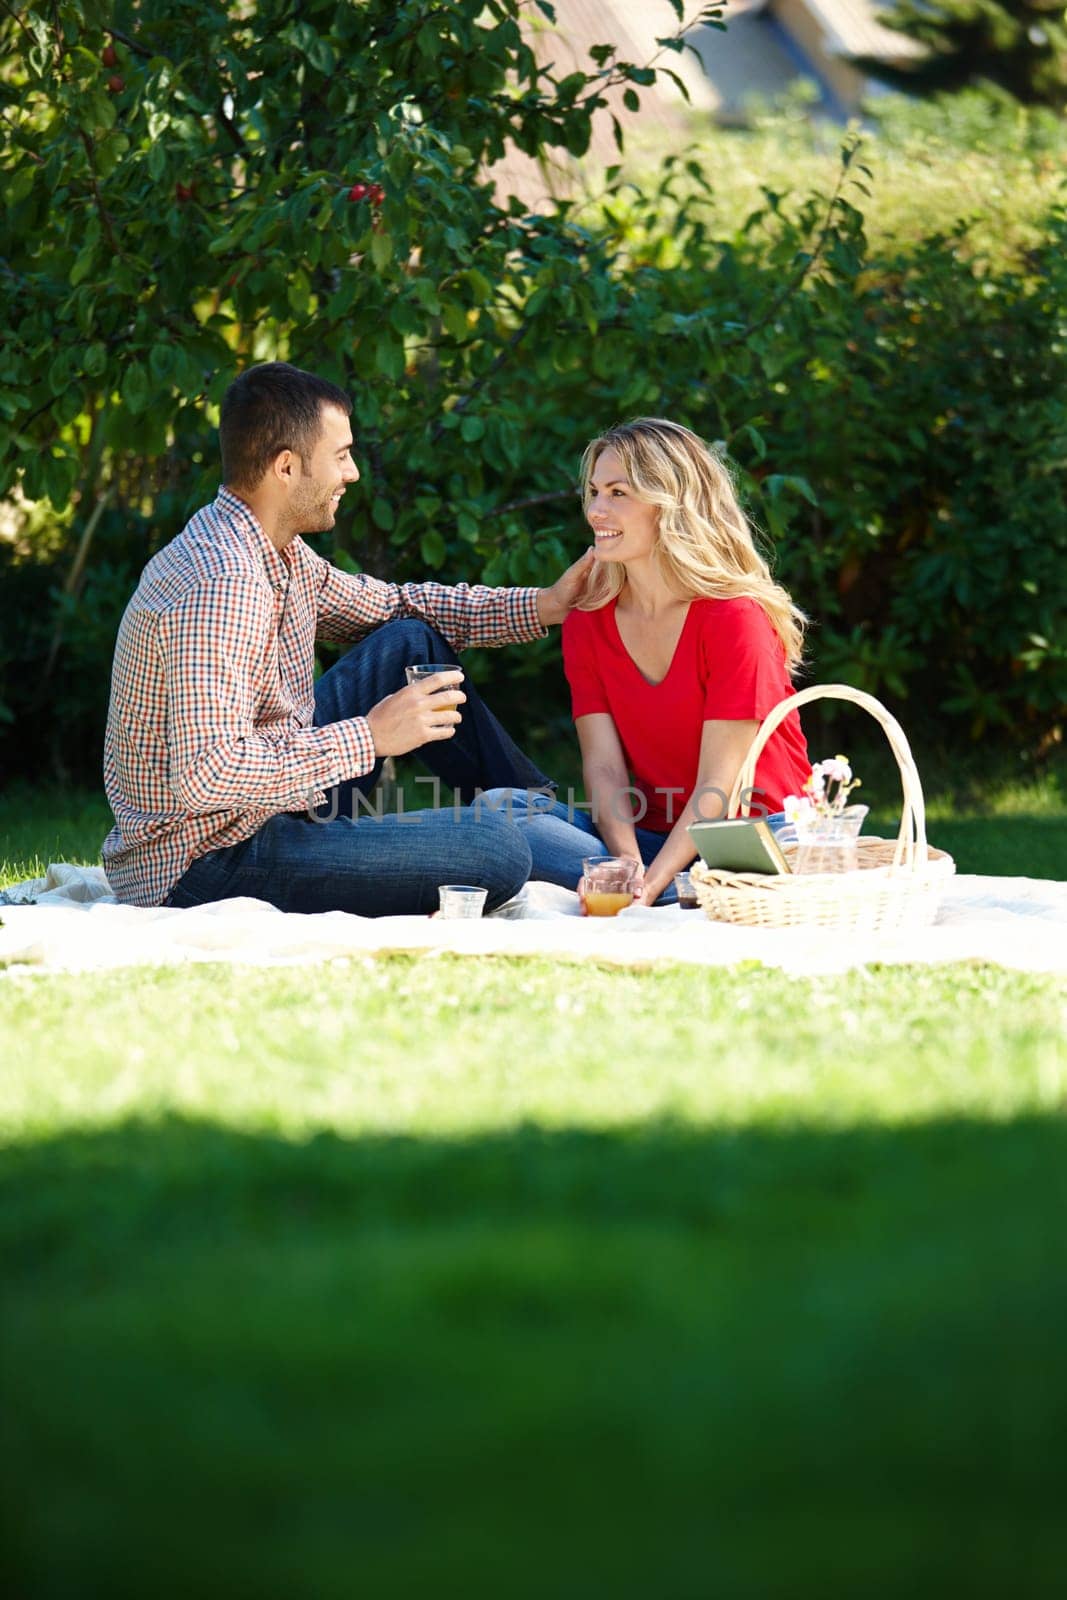 Happy, couple and picnic in park with basket for food, snacks and drink in outdoor. Man, woman and smiling in enjoying on date with touching, romance and love in summer for bonding or talking.